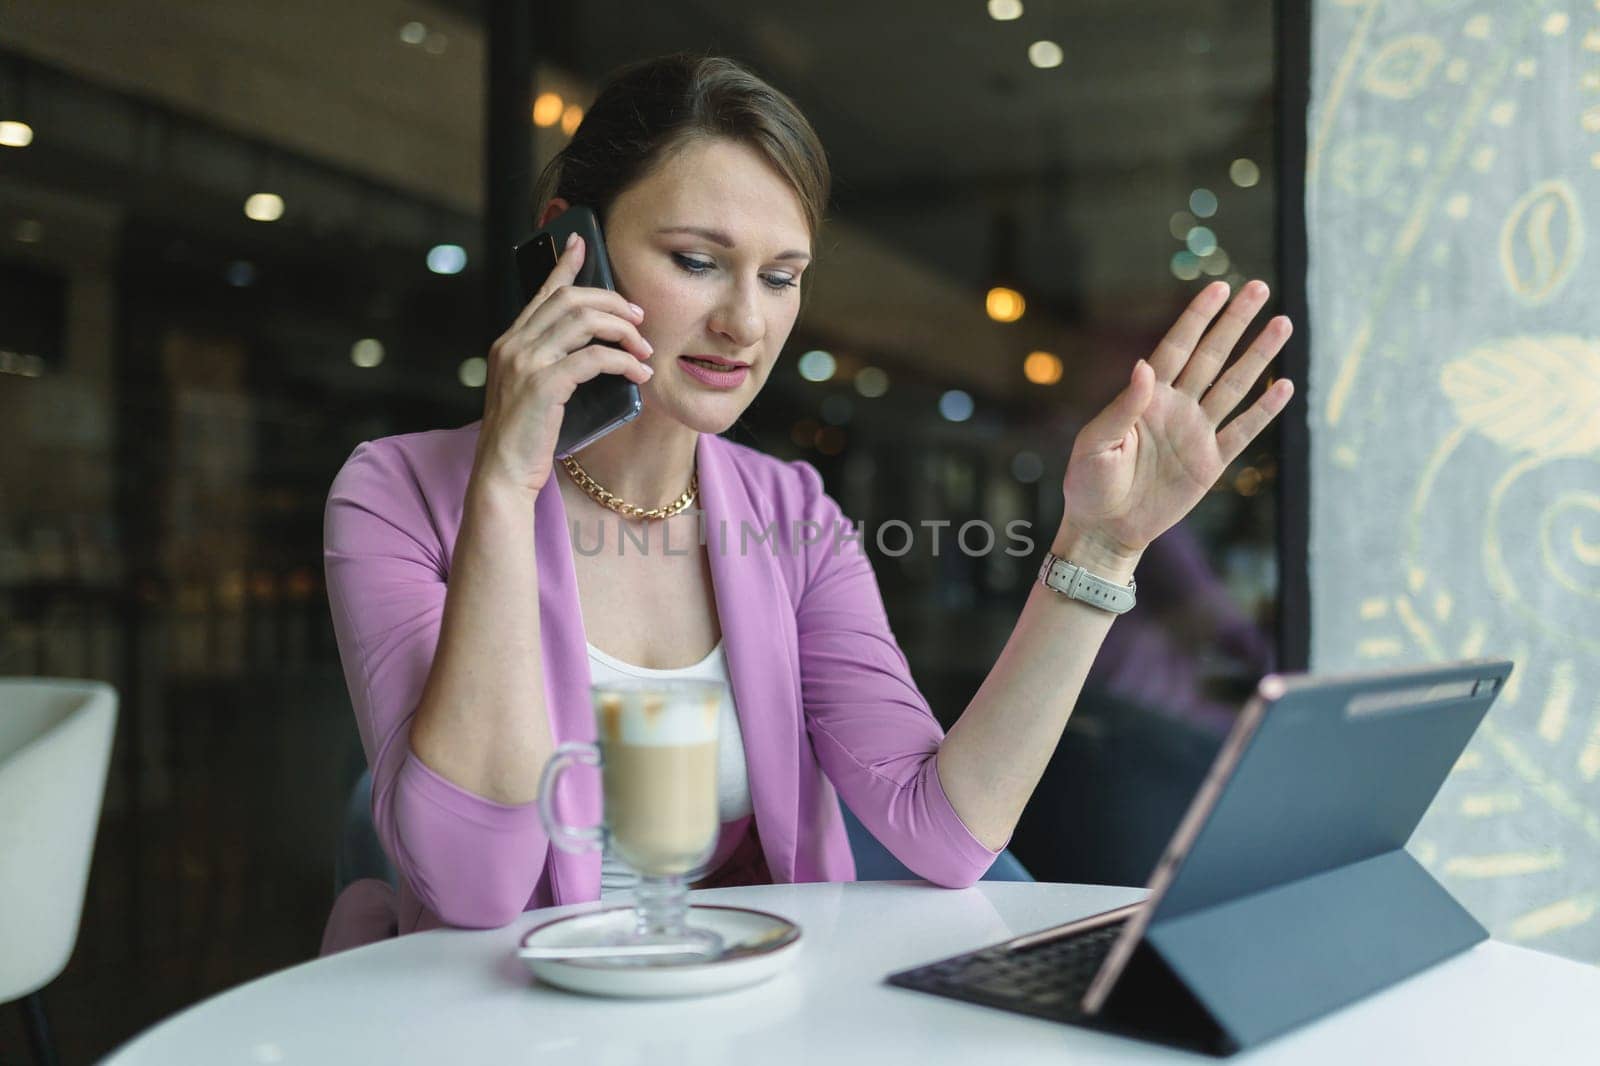 Young business woman solves business issues remotely by phone while sitting in a cafe by Rom4ek